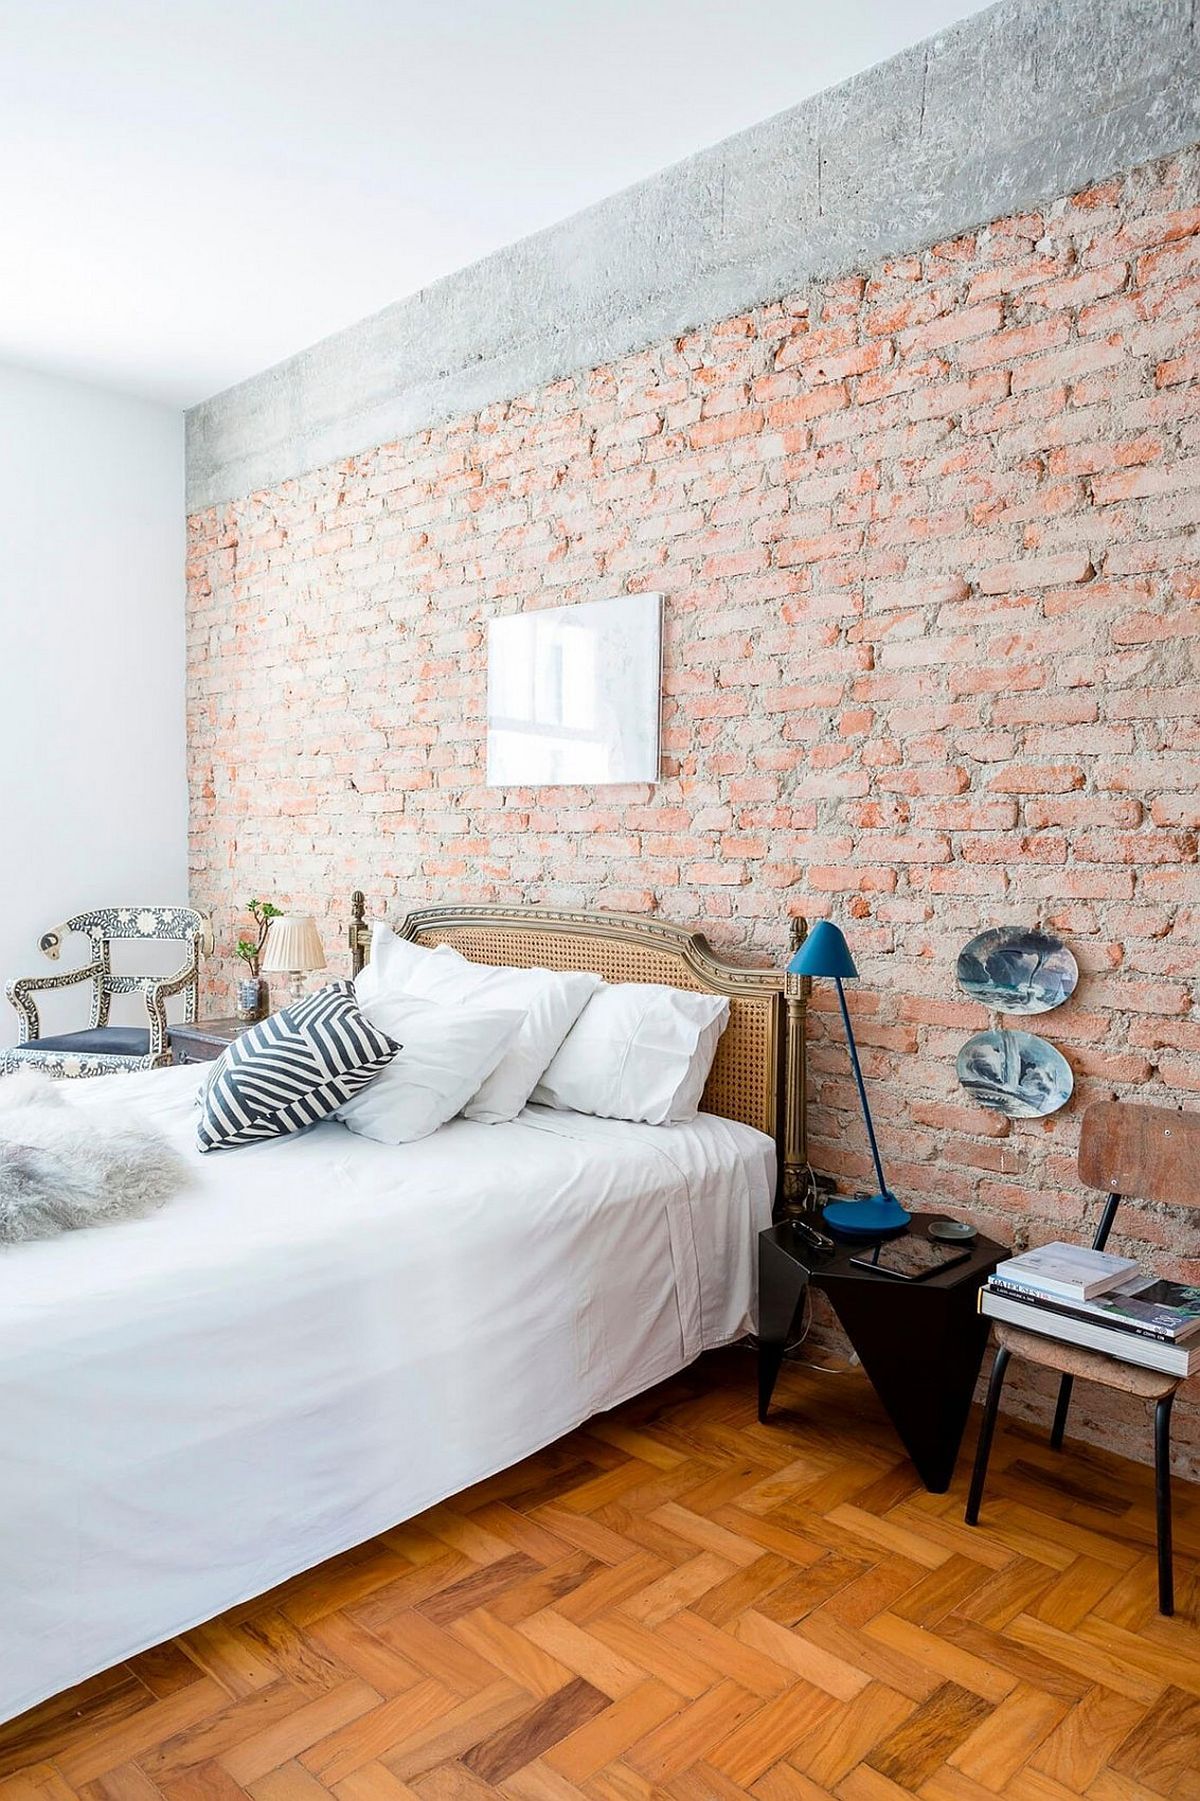 A brick wall in the bedroom serves as an eye-catcher there